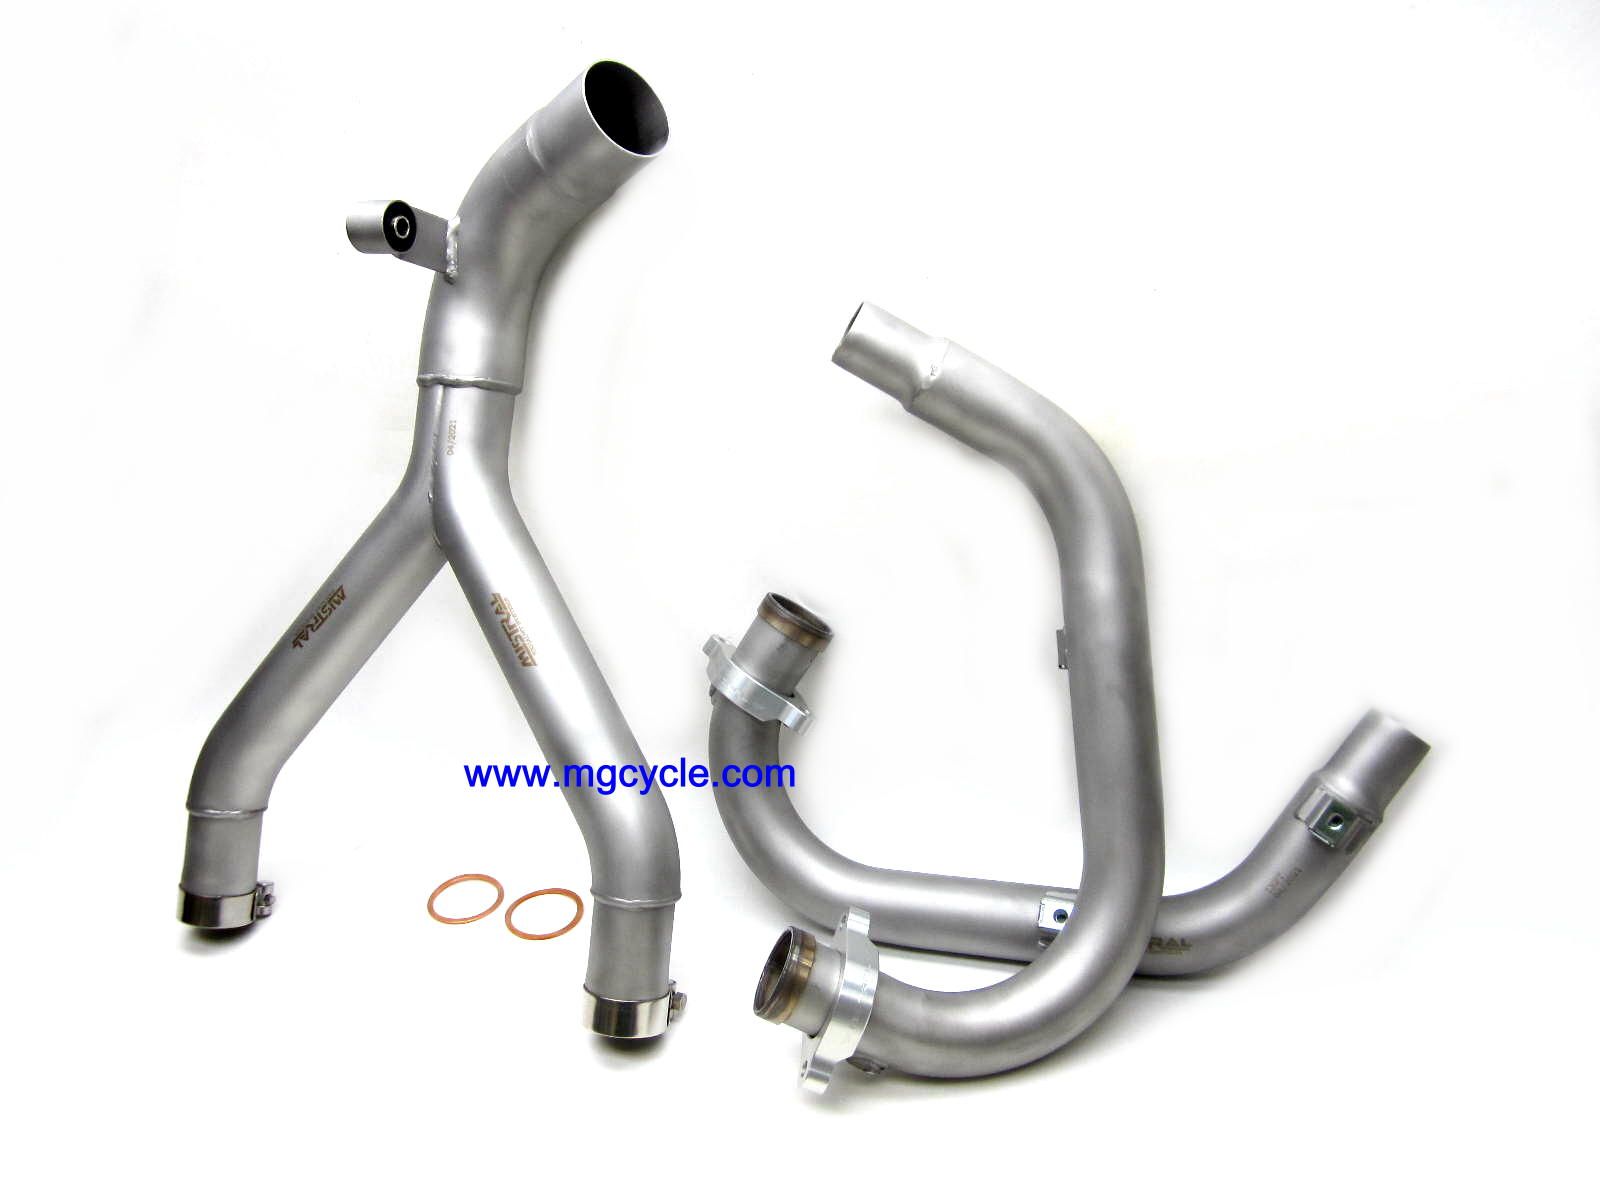 Mistral 2021 V85TT head pipe & Y pipe kit, EURO 5 approved